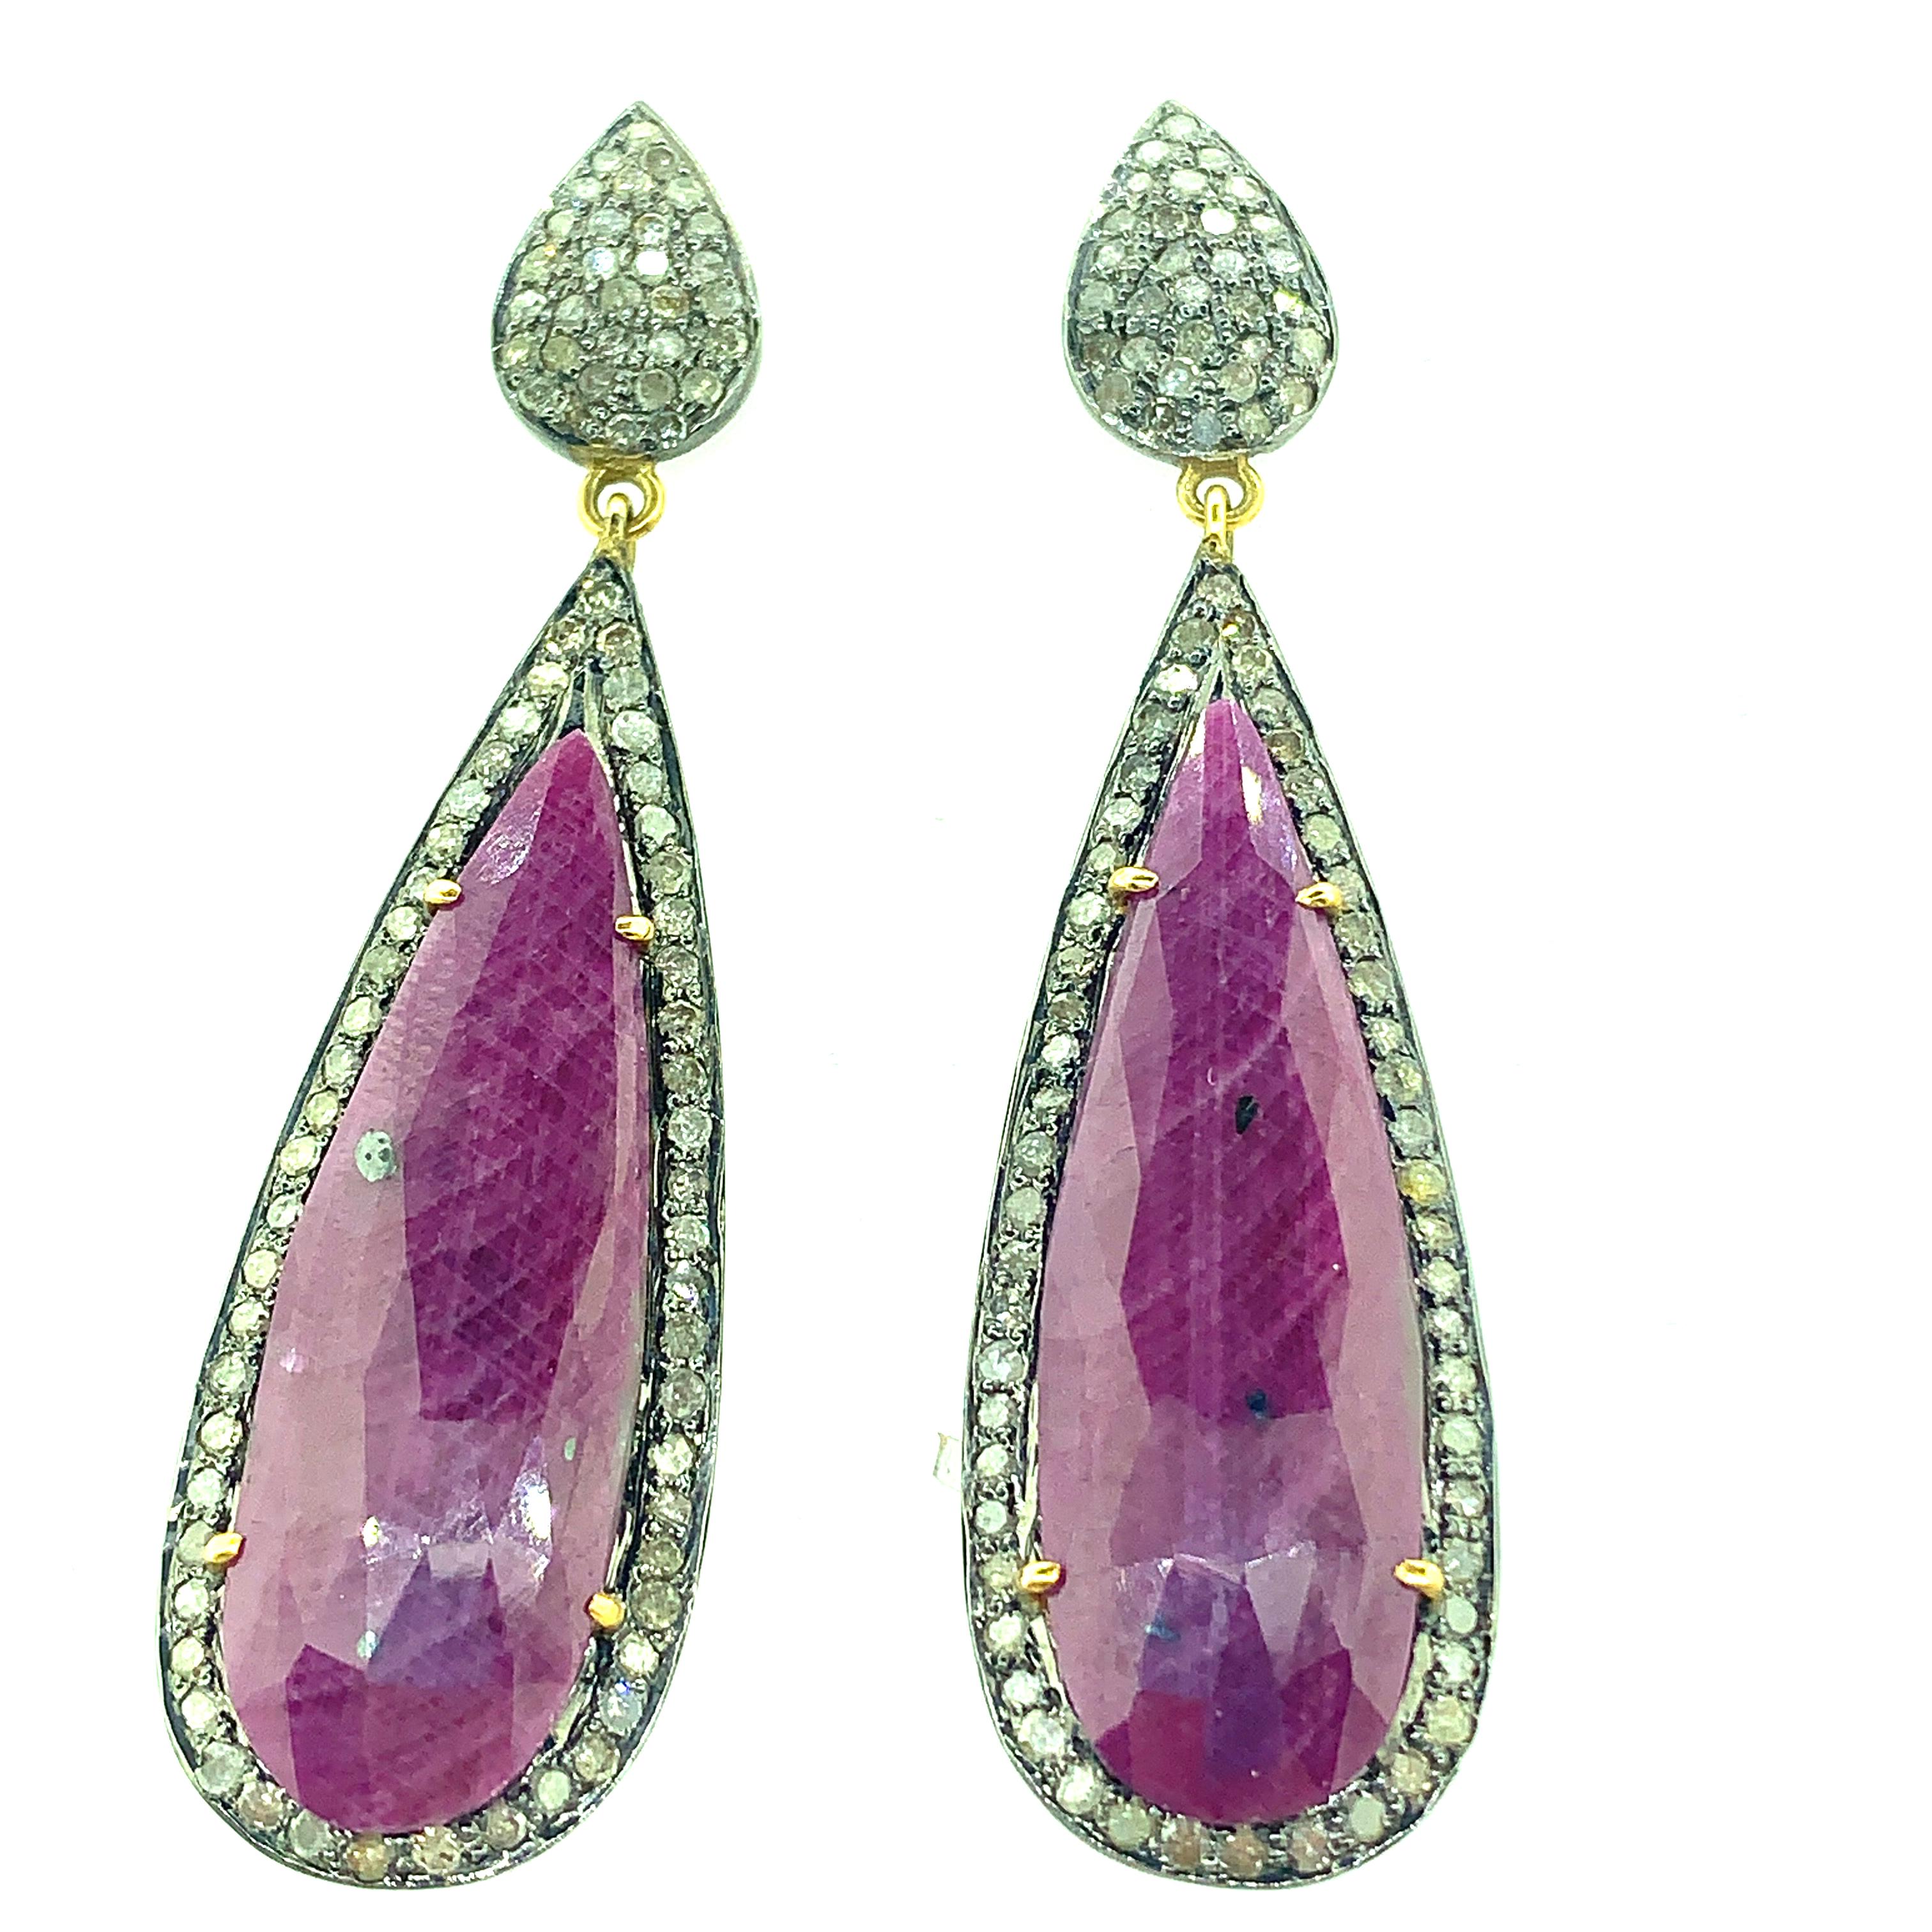 The illumination of 1.45 ct. t.w. champagne diamonds highlight the 29.20ct  pear -shaped real ruby. Set in oxidize sterling silver this hanging earring measures 2 1/2 inch long. Buffed to a brilliant oxidize luster, this post earring secure